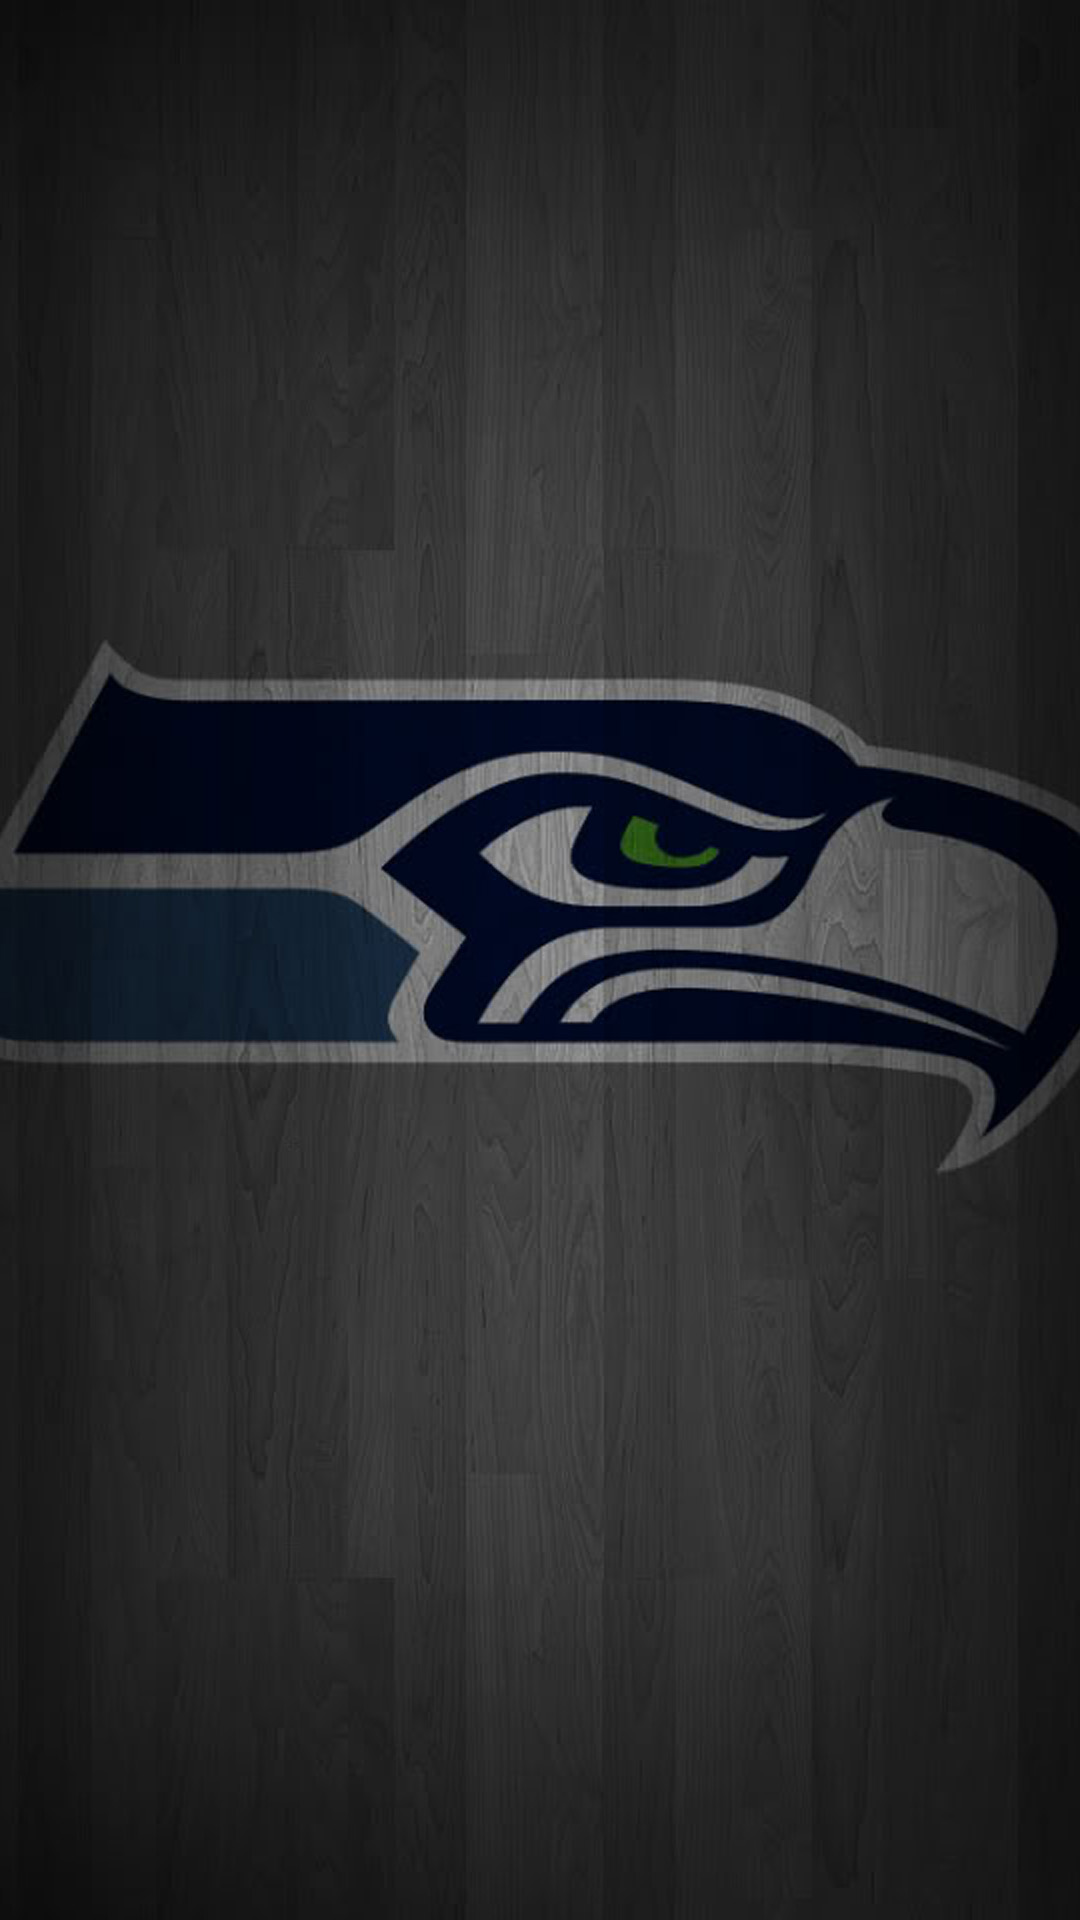 Seahawks Wallpaper For Galaxy S5